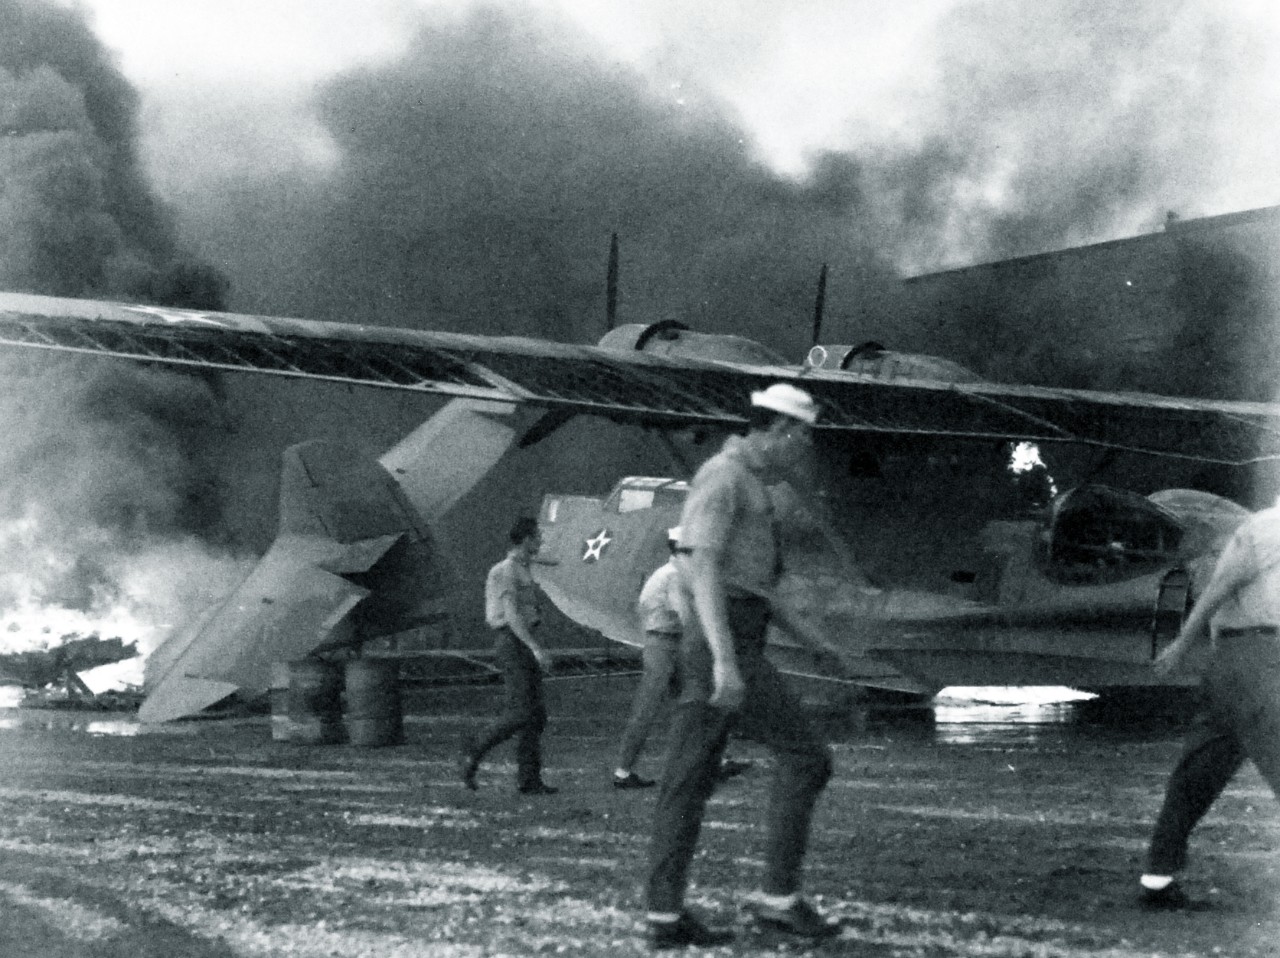 <p>80-G-32833: Japanese Attack on Pearl Harbor, December 7, 1941. KNOE 119 Rescue operations after the first attack and before bombing at Naval Air Station, Kaneohe Bay. Pulling a partially burning PBY aircraft from center of fire area.&nbsp;</p>
